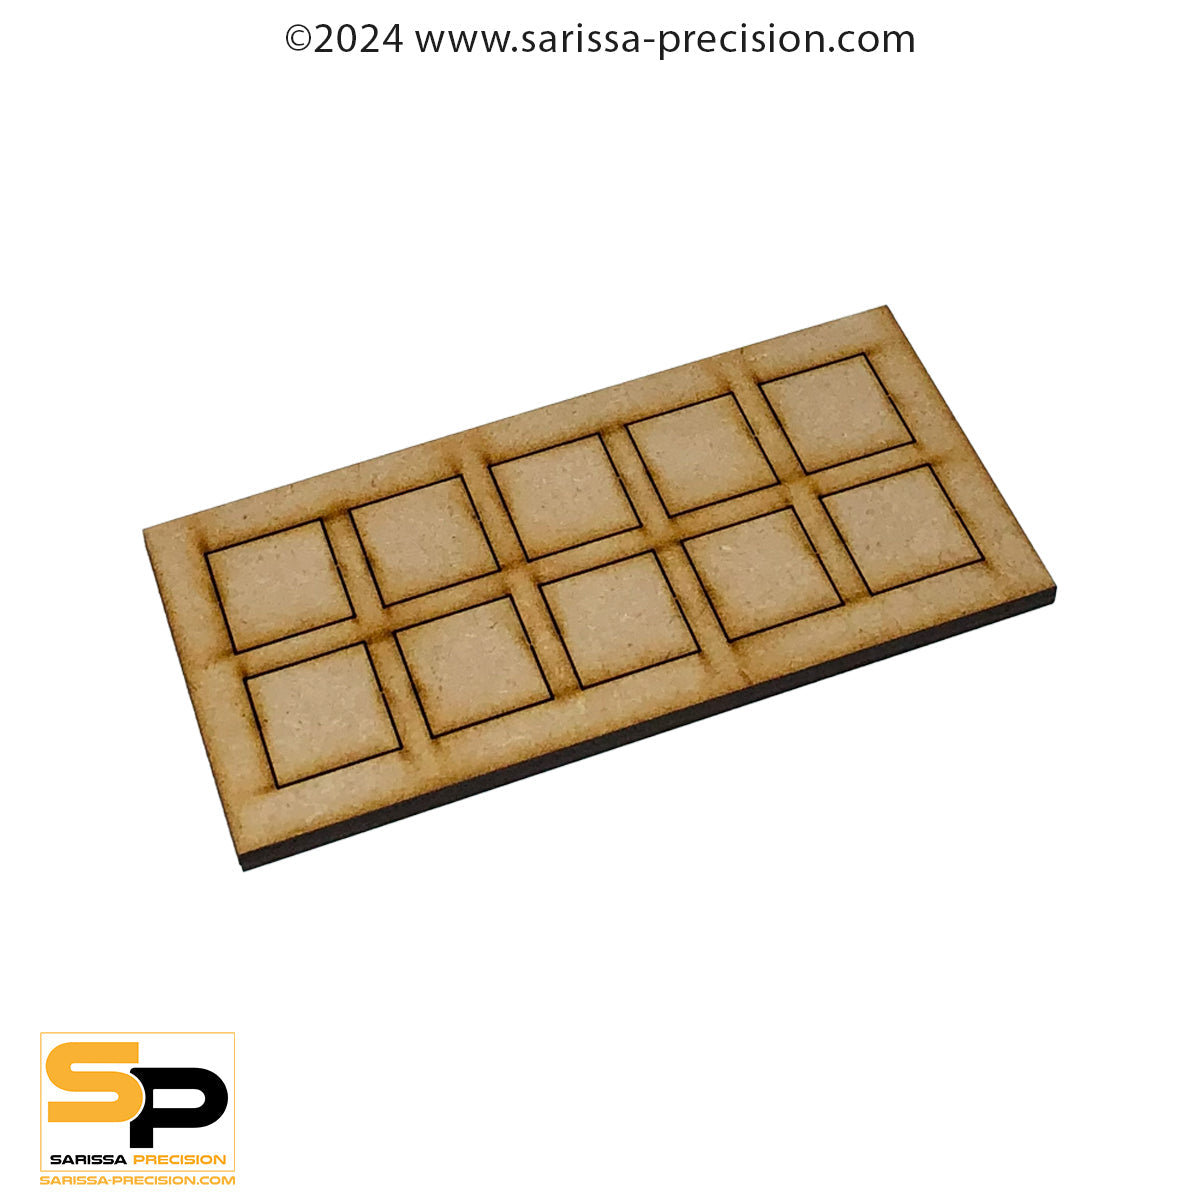 15x6 25x25mm Conversion Tray for 20x20mm bases